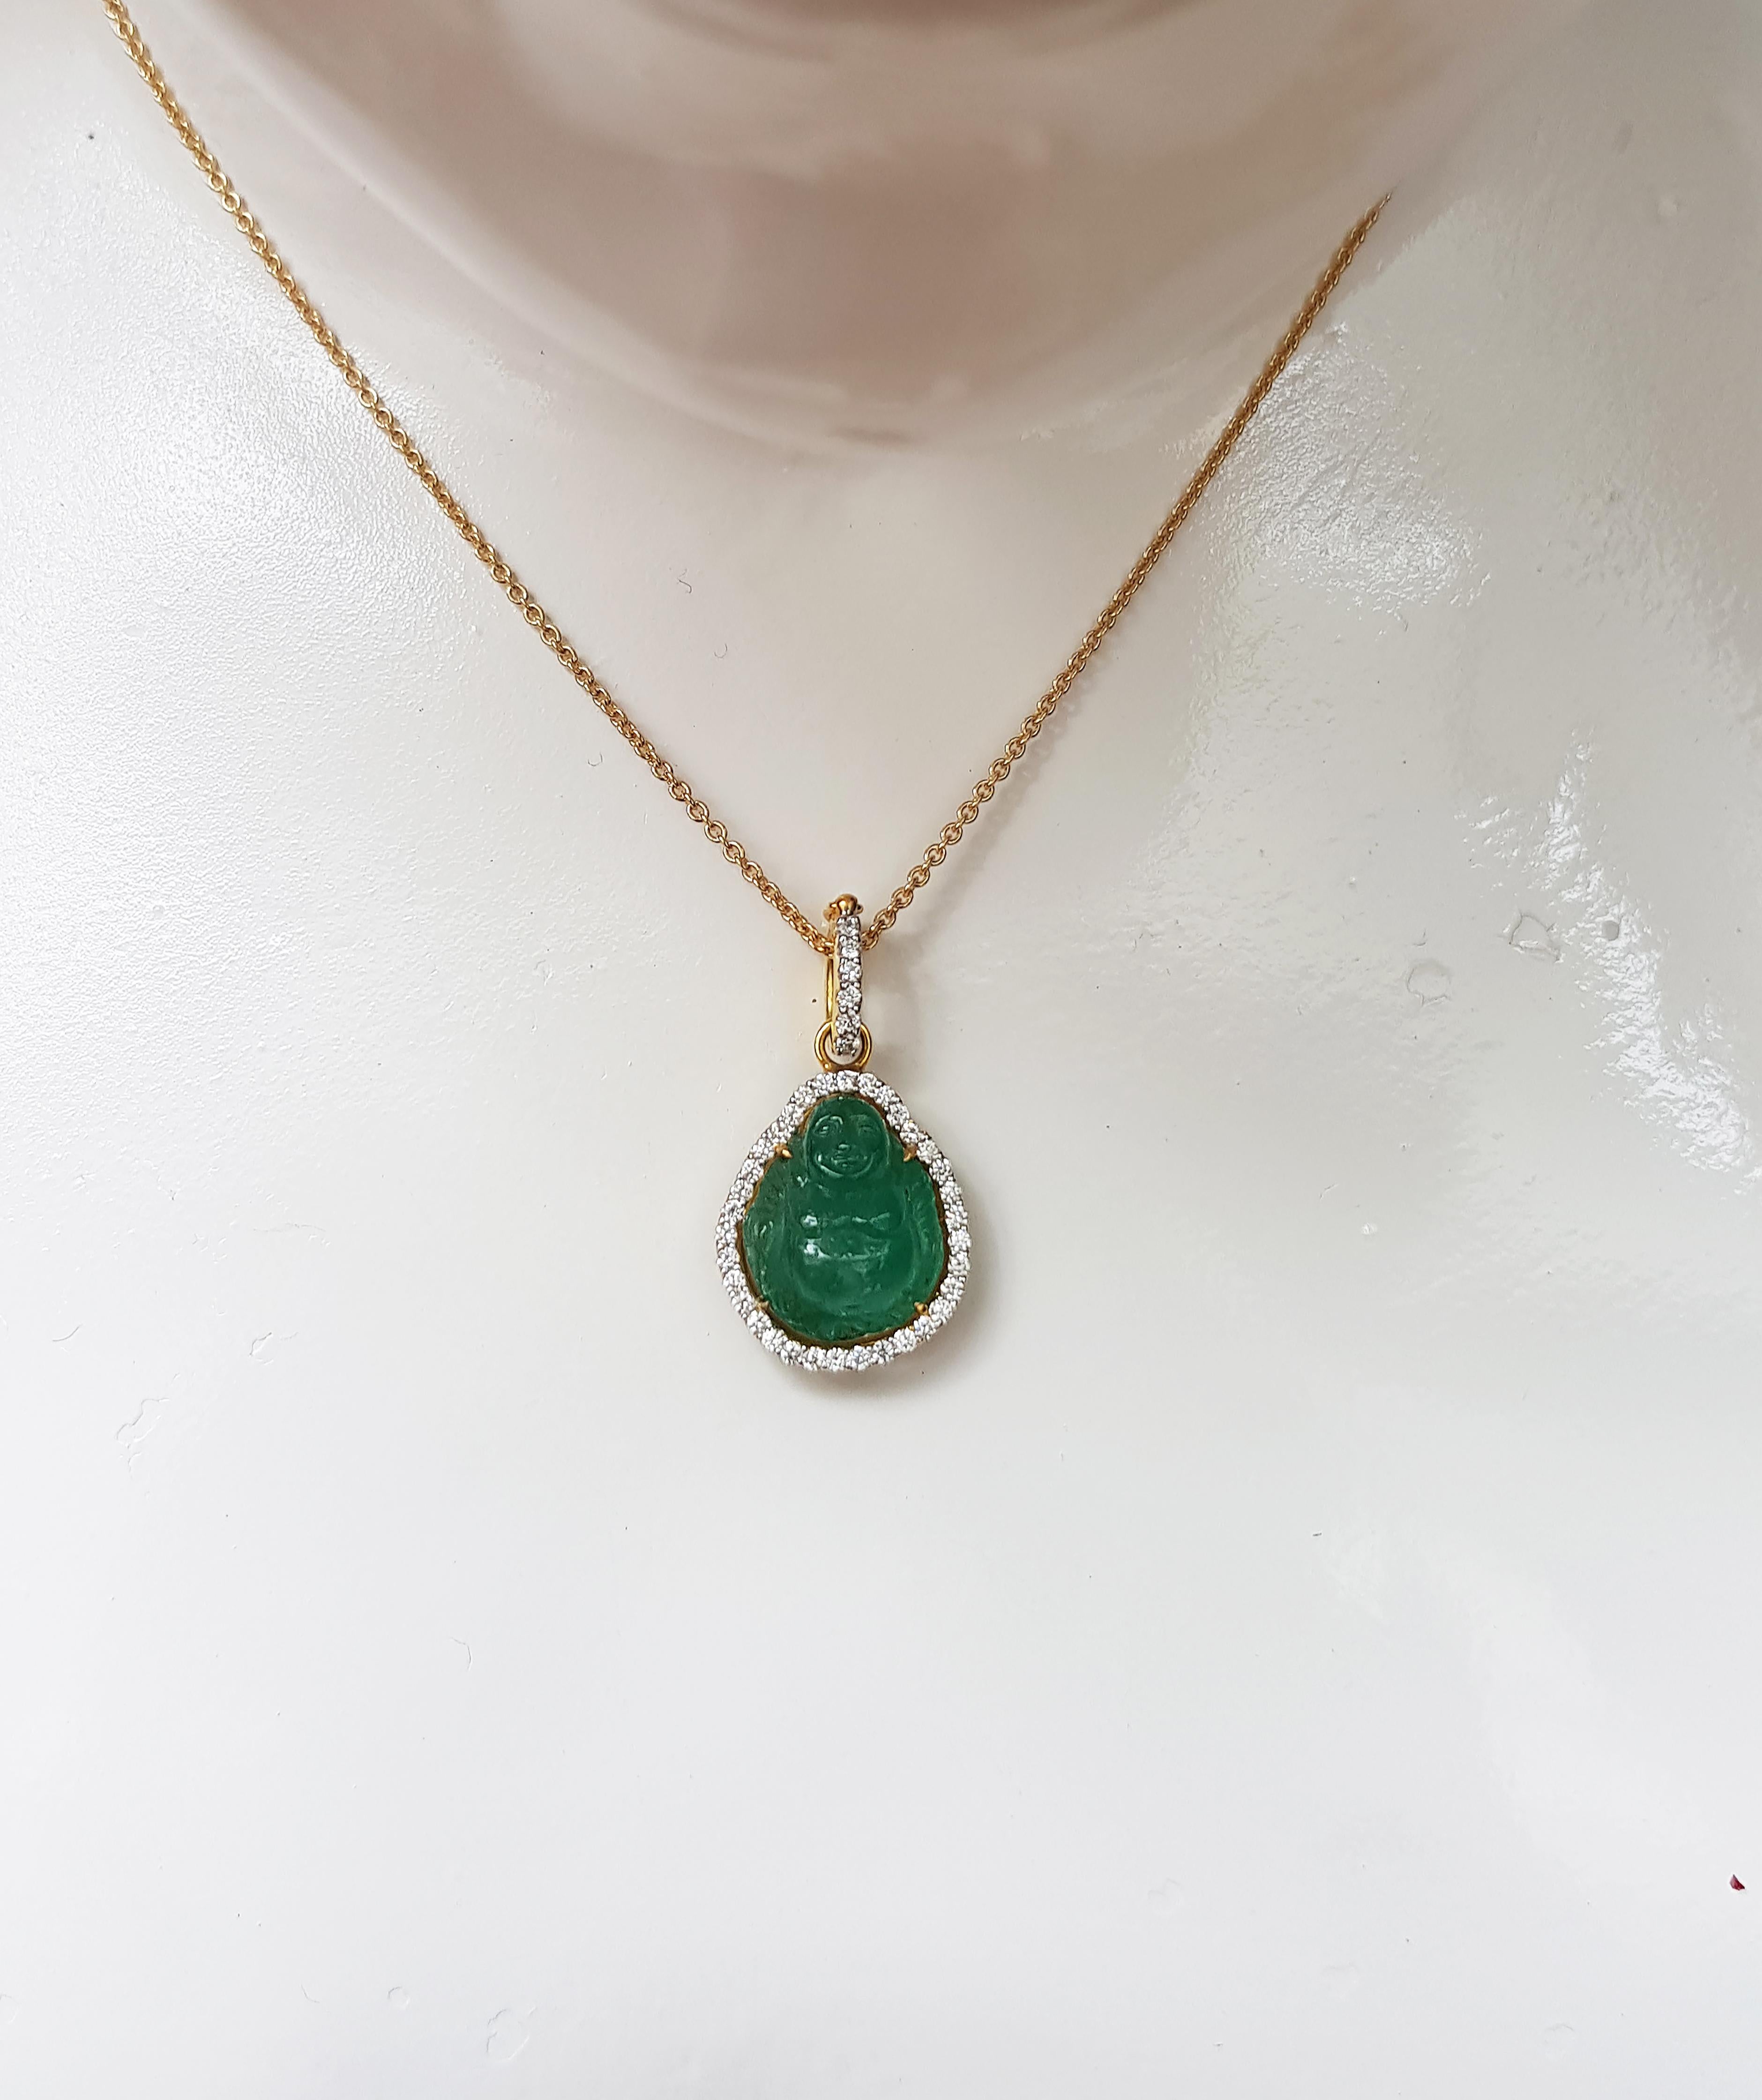 Emerald 9.46 carats with Diamond 0.46 carat Pendant set in 18 Karat Gold Settings
(chain not included)

Width: 1.5 cm
Length: 3.0 cm 

